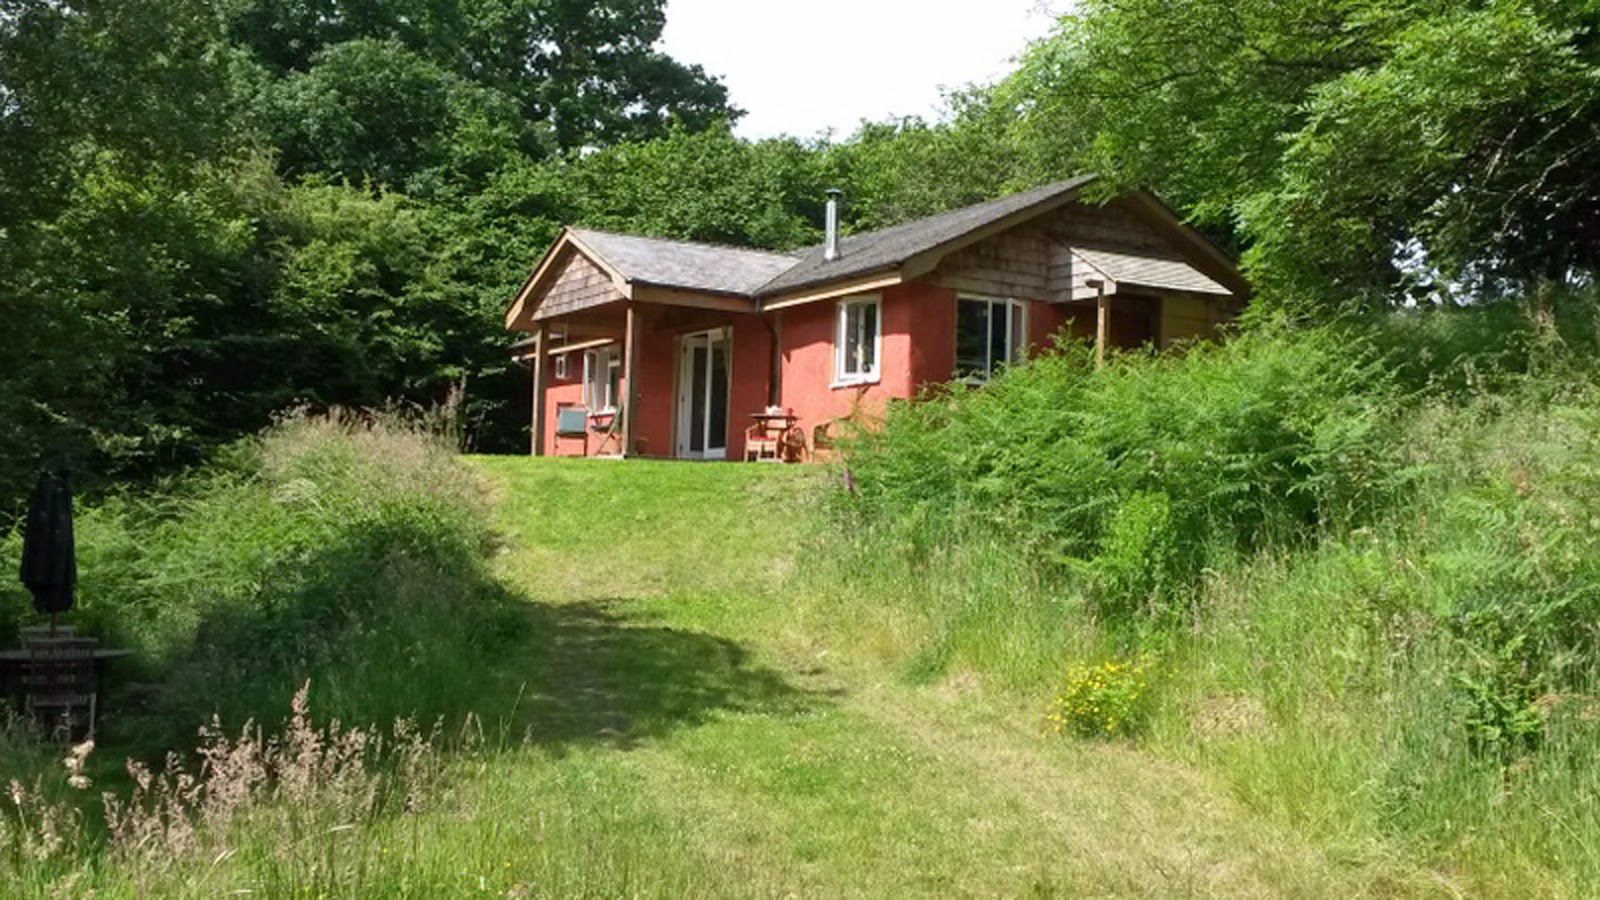 Show Me Wales Mid Wales Farm Cottages In Last Minute Offer This